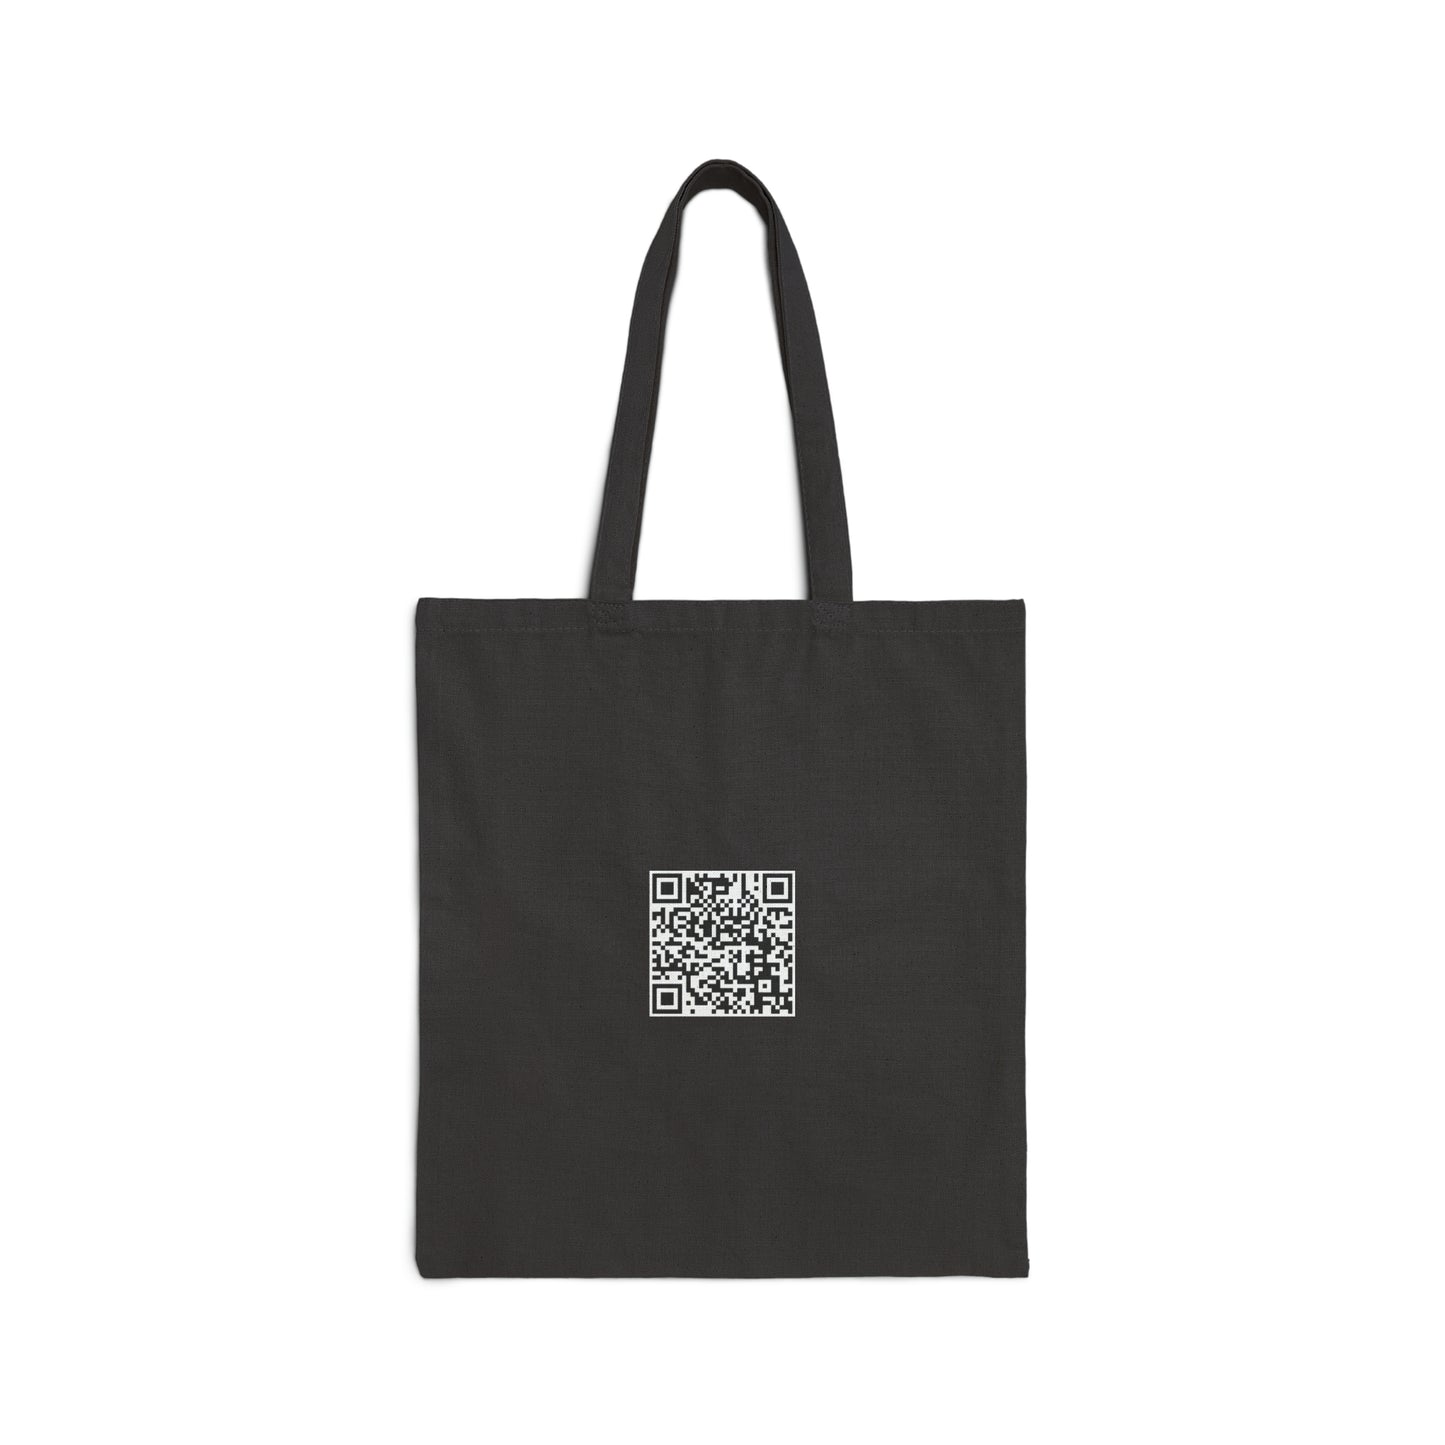 Blood Of The Witch - Cotton Canvas Tote Bag